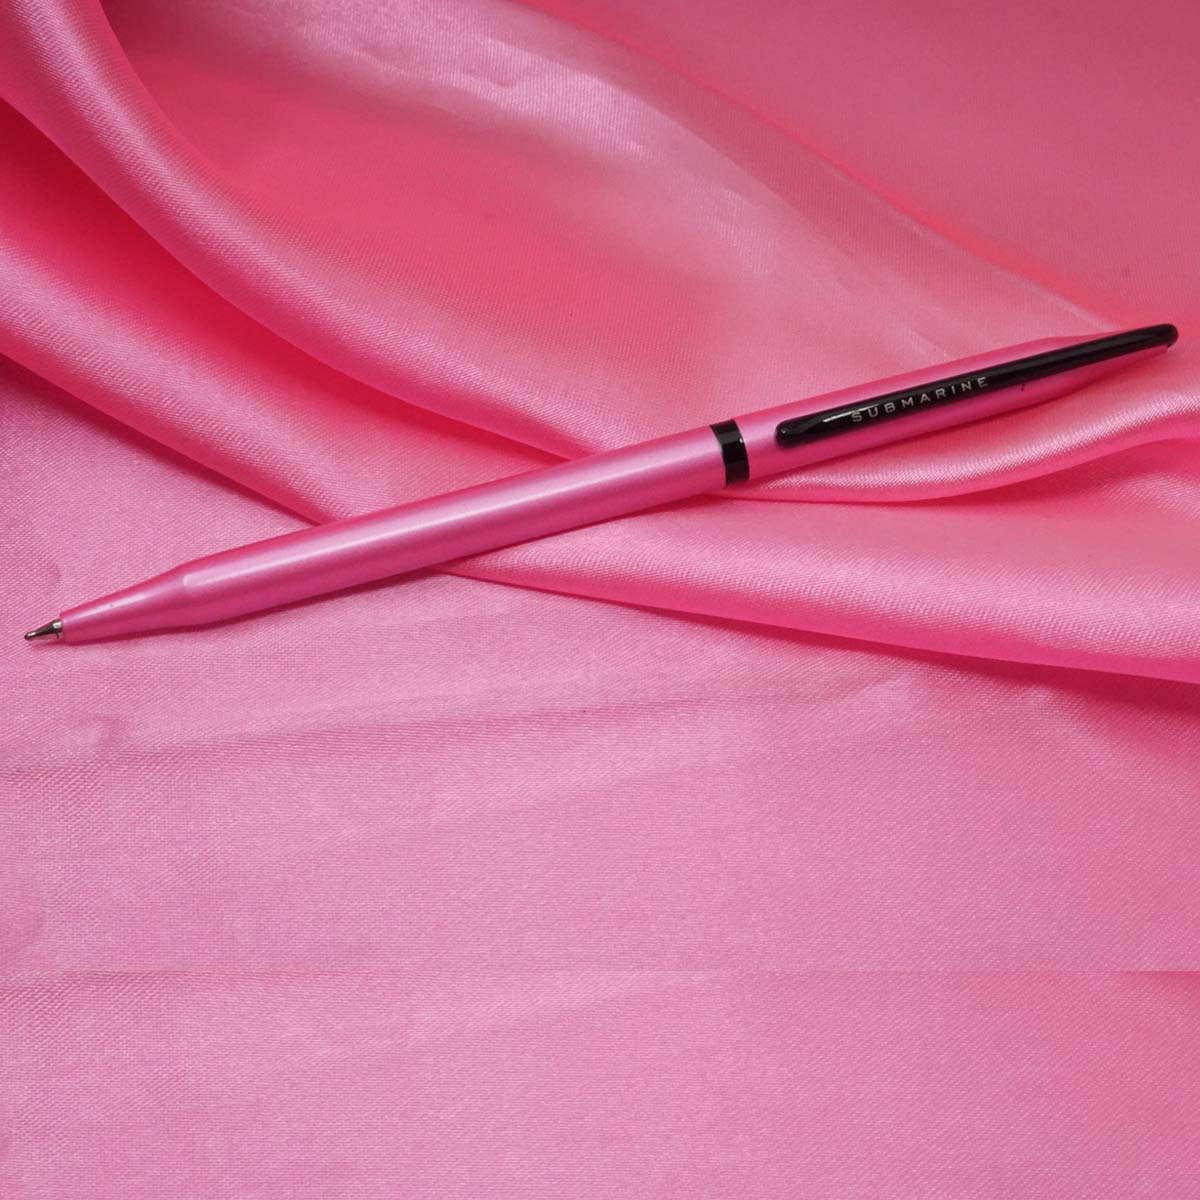 Submarine 989 Slim Glossy Finish Pink Color With Black Clip Fine Tip Twist Type Ball Pen SKU 21030